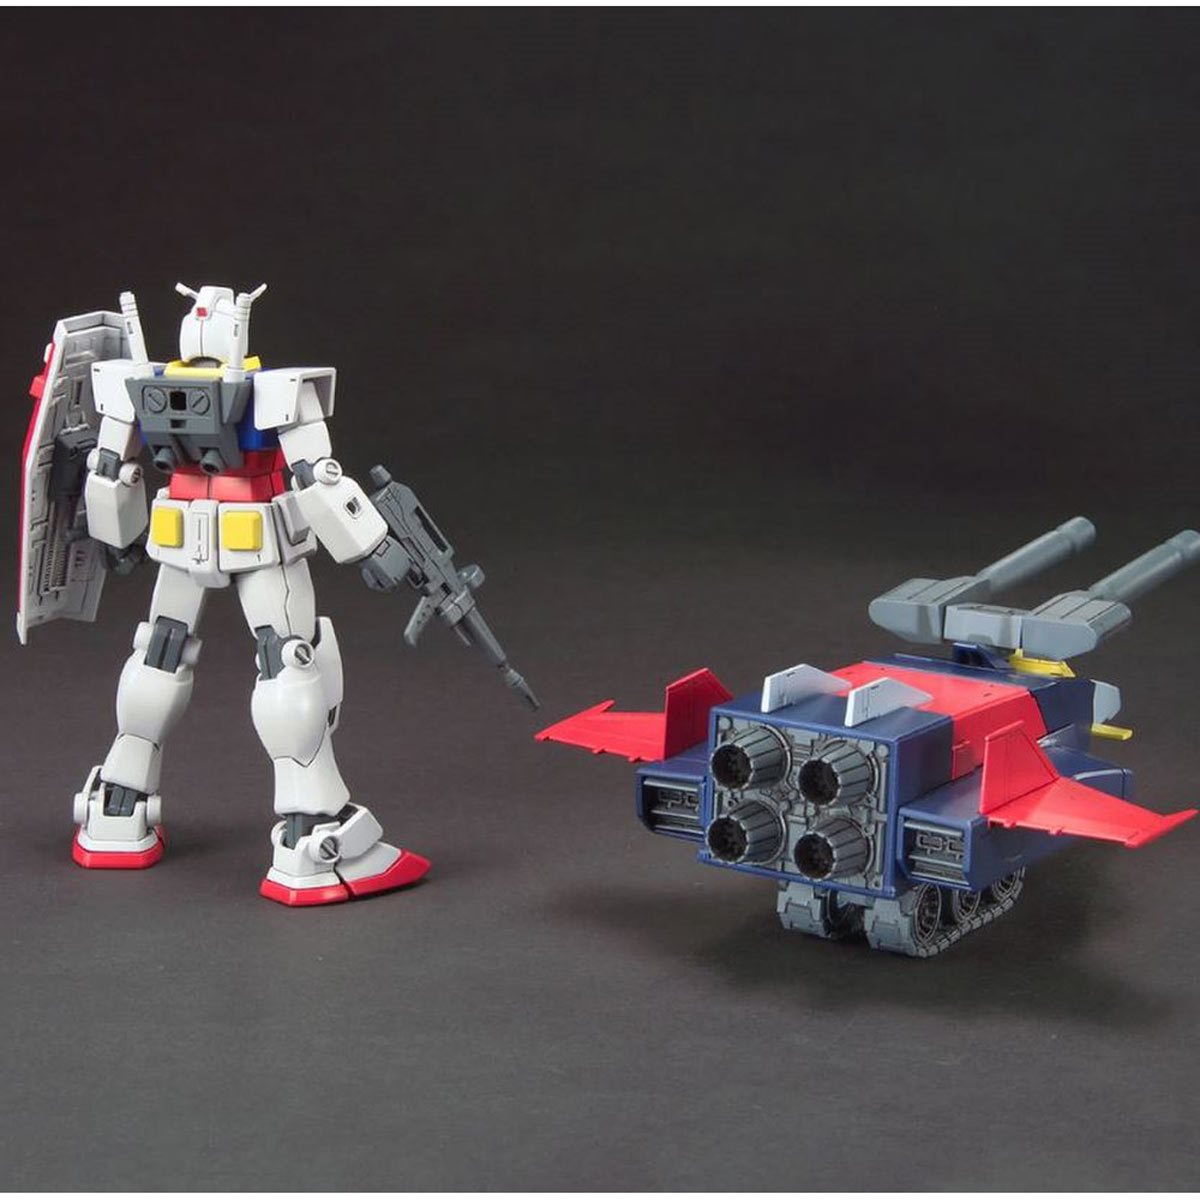 Mobile Suit Gundam G-Armor G-Fighter and RX-78-2 High Grade 1:144